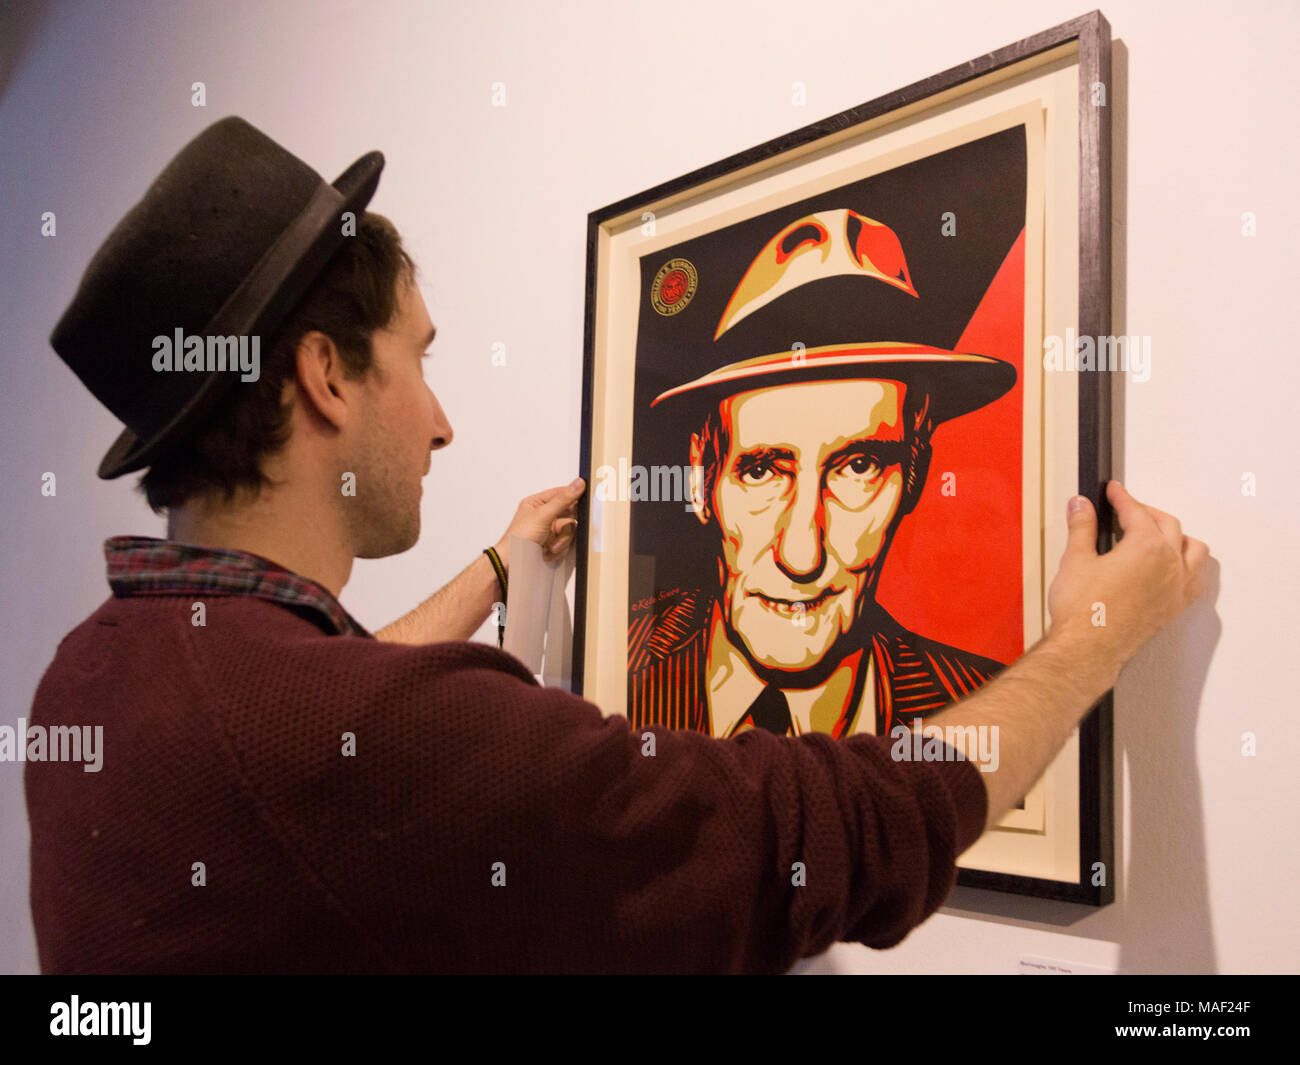 London, UK. 28 August 2014.  Curator James Elphick straightens the screenprint picture 'Burroughs 100 Years' by Kate Simon and Shepard Fairey. The 'Animals in the Wall' exhibition showcases a new side to iconic American writer and creative mind Willam S Burroughs. The exhibition features 40 original Burroughs artworks and never before shown pieces of contributing artists. 'Animals in the Wall' is curated by James Elphick and Yuri Zumancic and runs from 29 August 20 to 7 September 2014 at the Londonewcastle Project Space in Redchurch Street, Spitalfields, London. Stock Photo